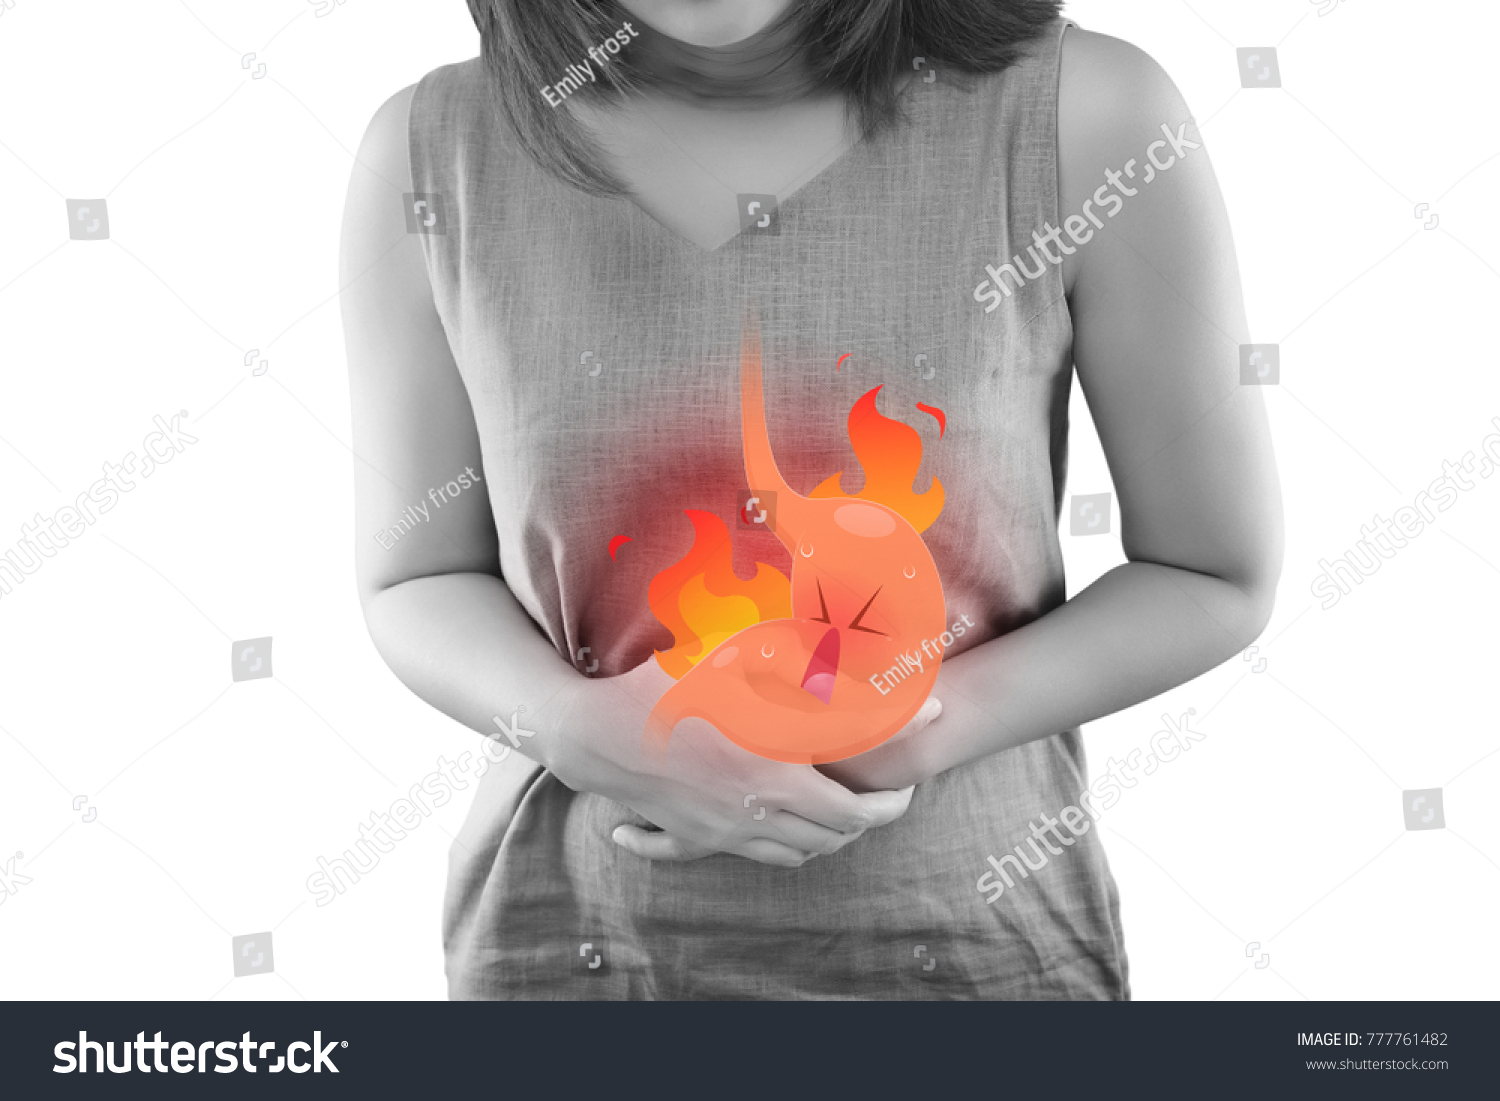 The Photo Of Cartoon Stomach On Woman's Body Against White Background, Acid Reflux Disease Symptoms Or Heartburn, Concept With Healthcare And Medicine #777761482